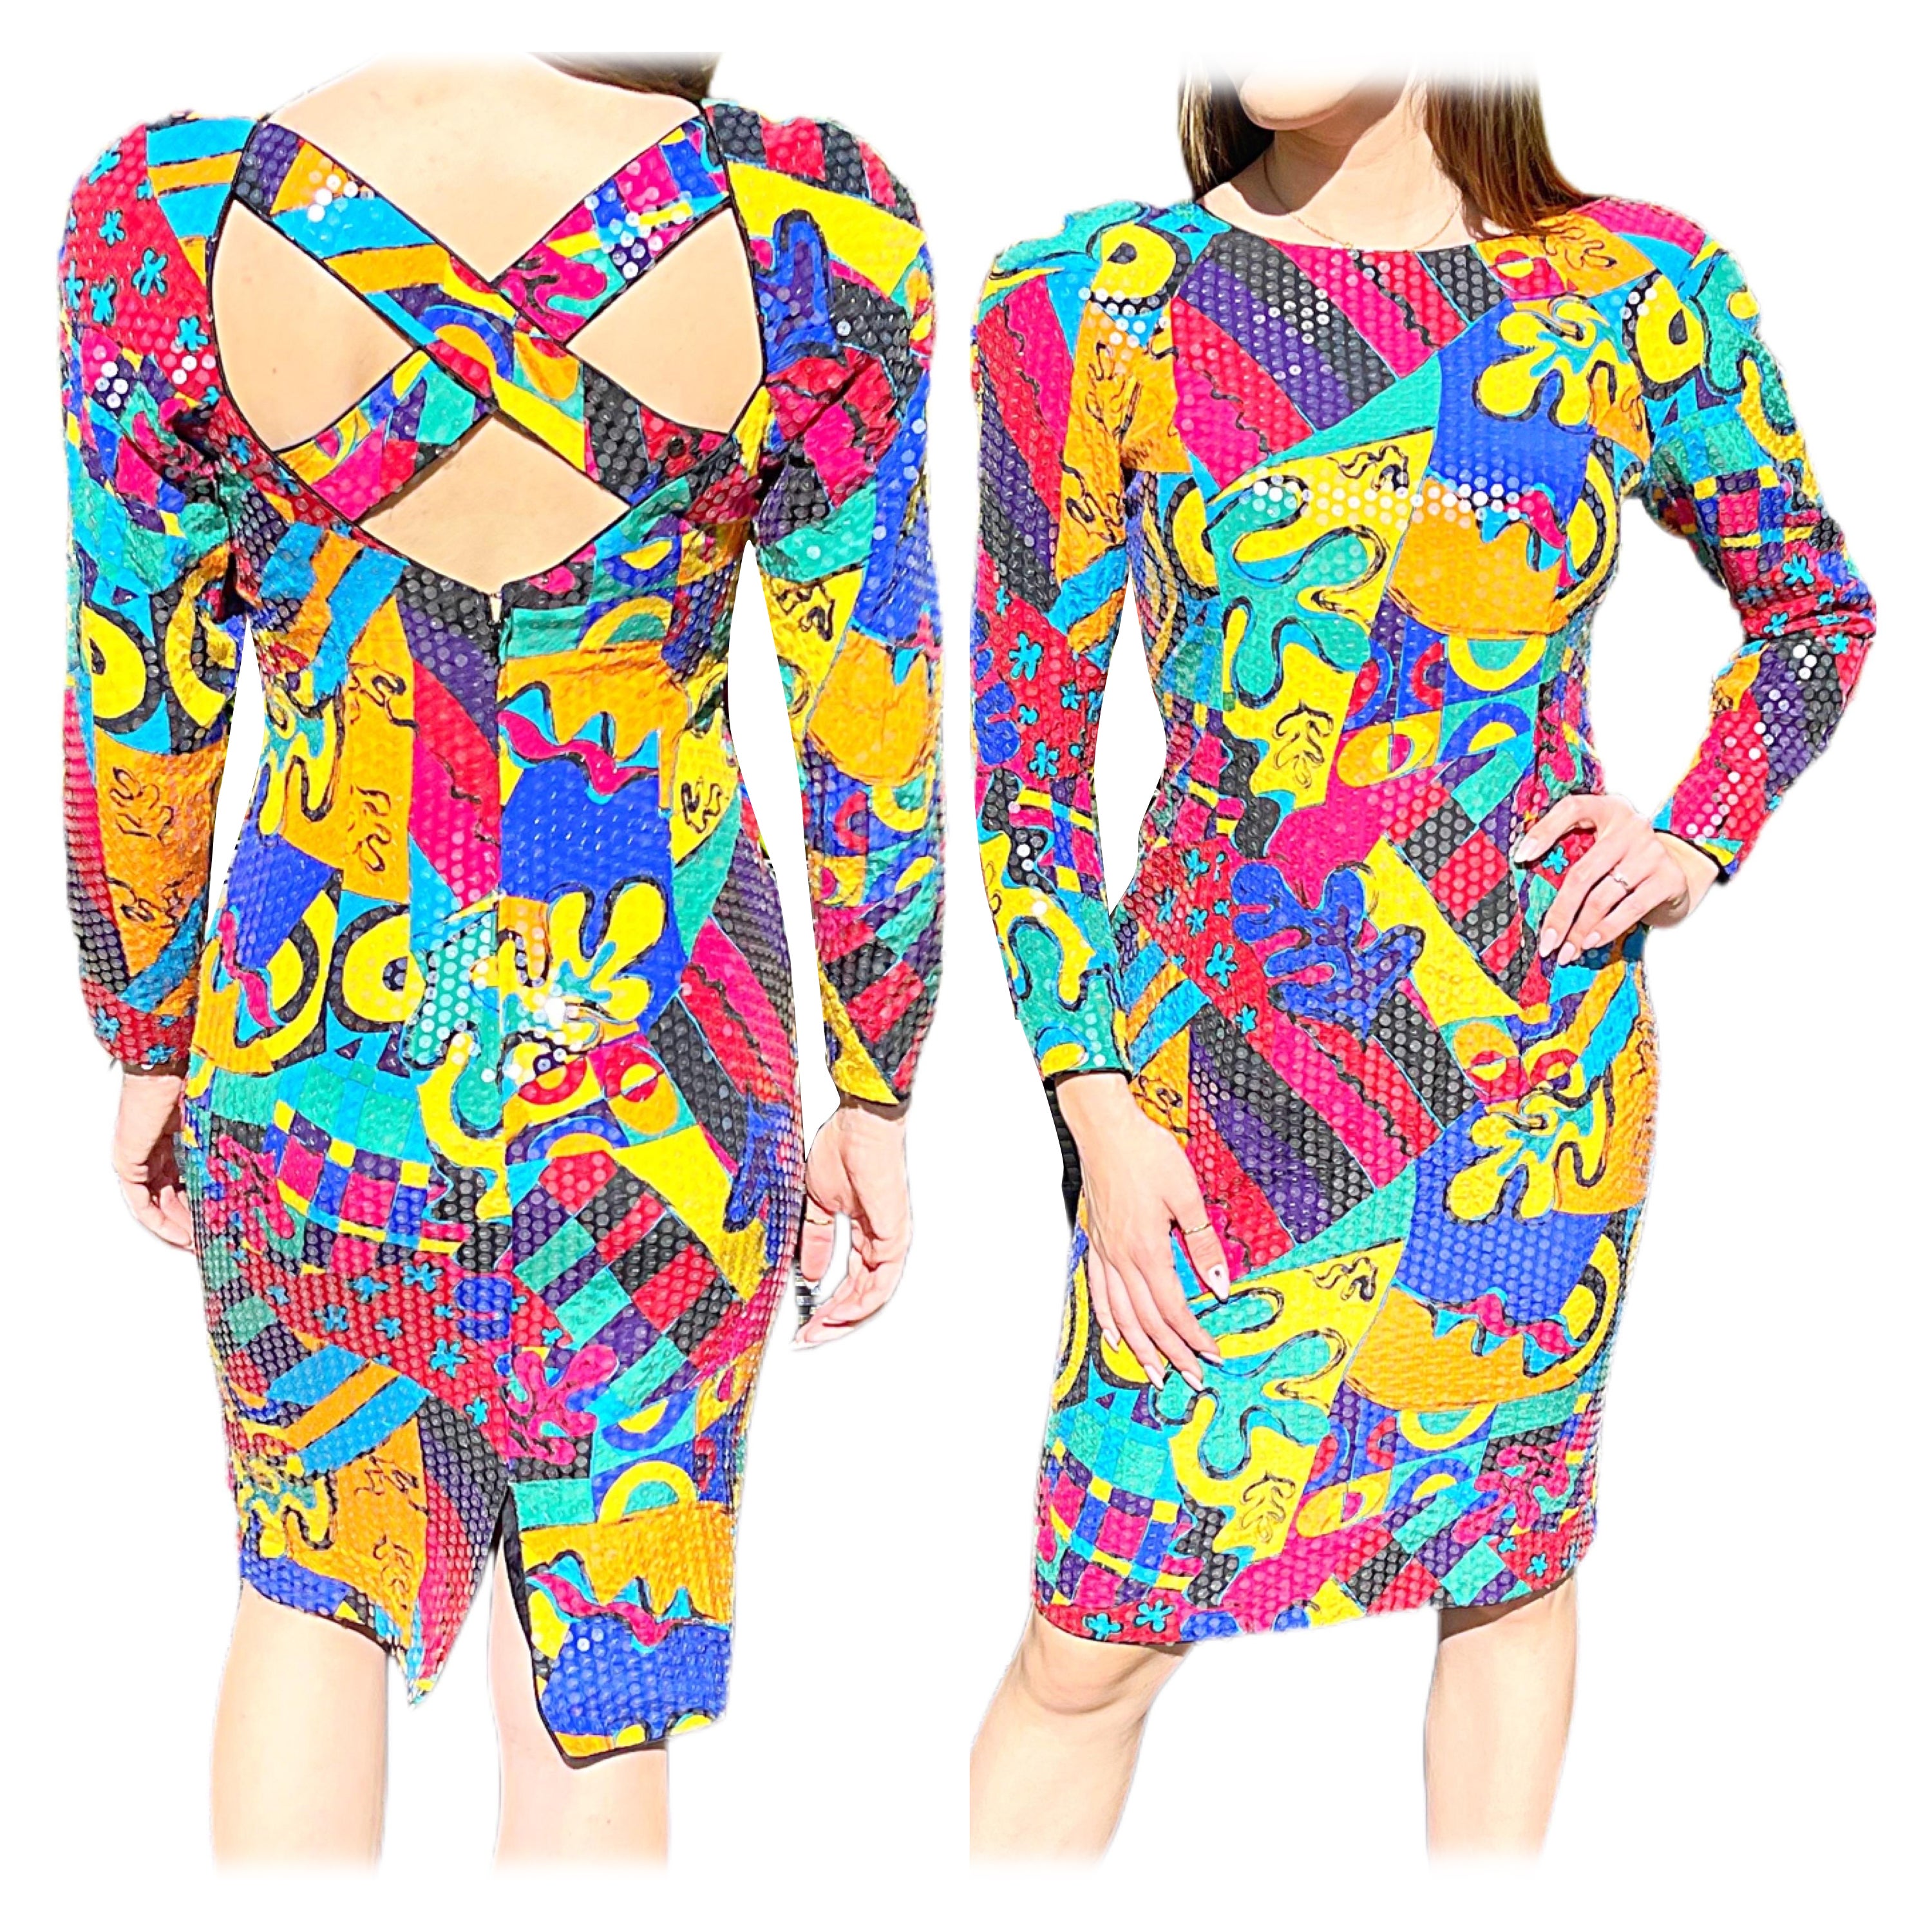 1980s Saks 5th Avenue Size 6 /8 Fully Sequined Colorful Graffiti Print 80s Dress For Sale